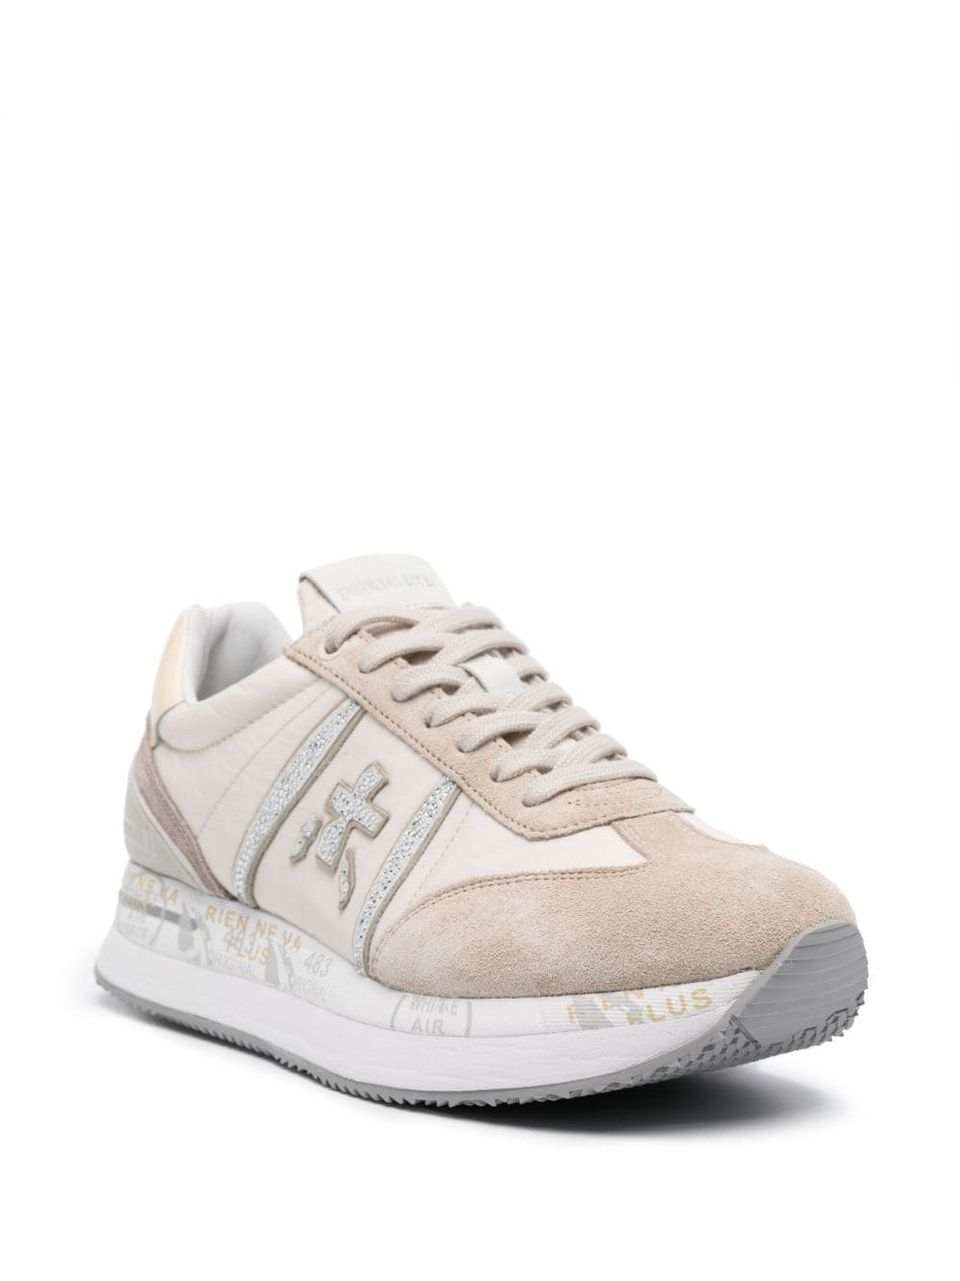 'Conny 6671' sneakers